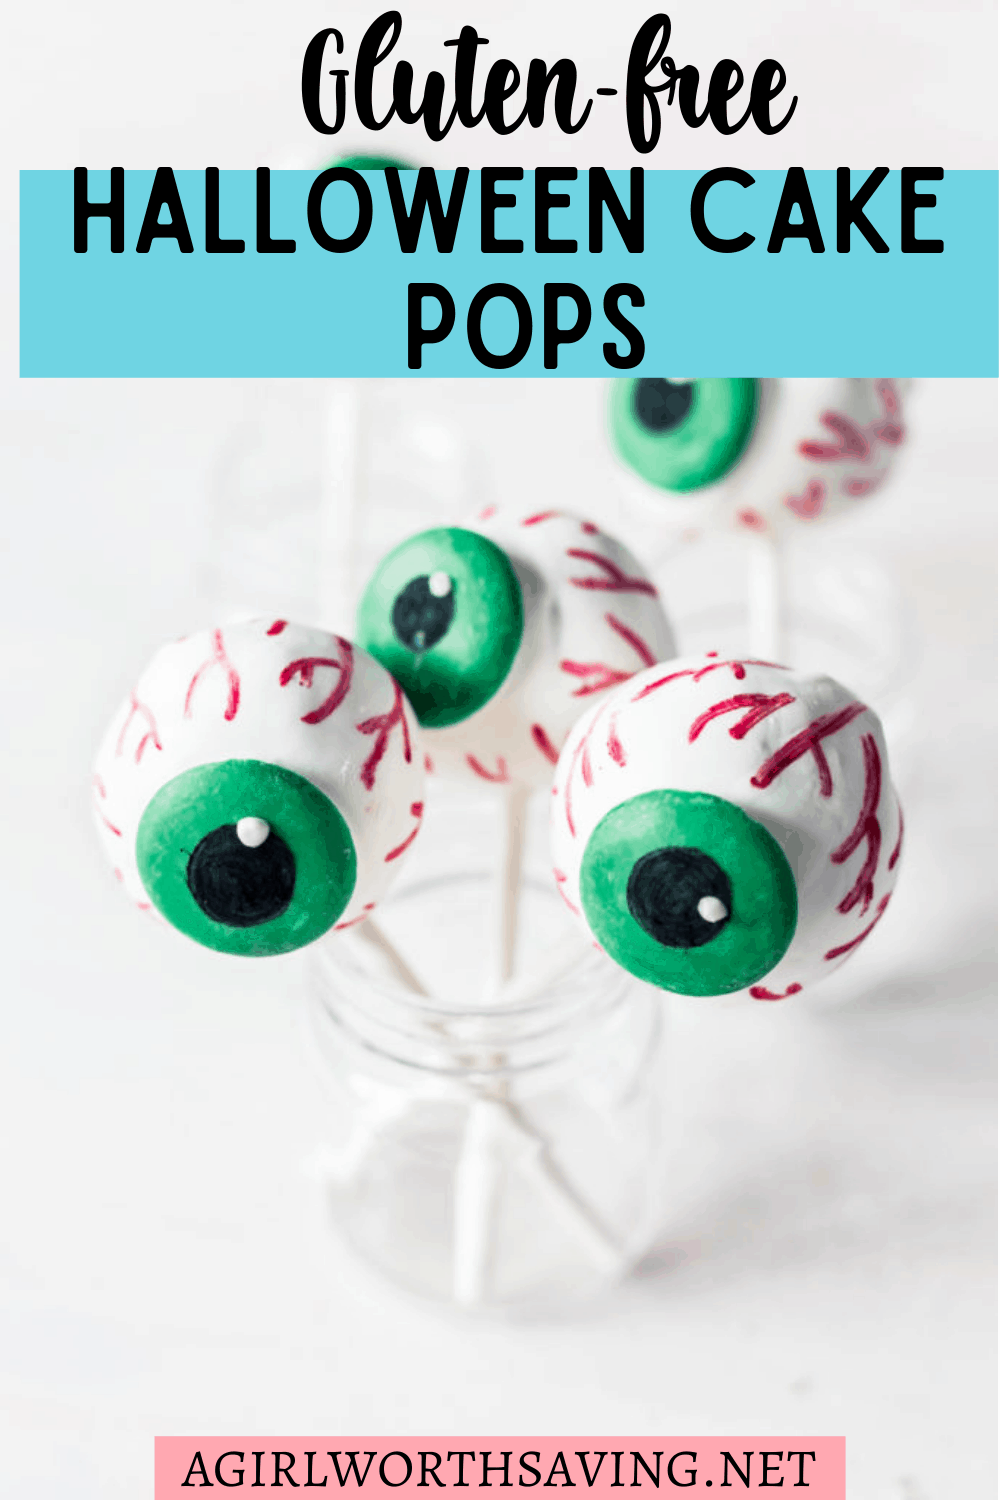 Are you looking for a fun and festive treat to serve at your next Halloween party? Look no further than Halloween cake pops! These little treats are perfect for any spooky occasion, and they're sure to be a hit with both kids and adults alike.